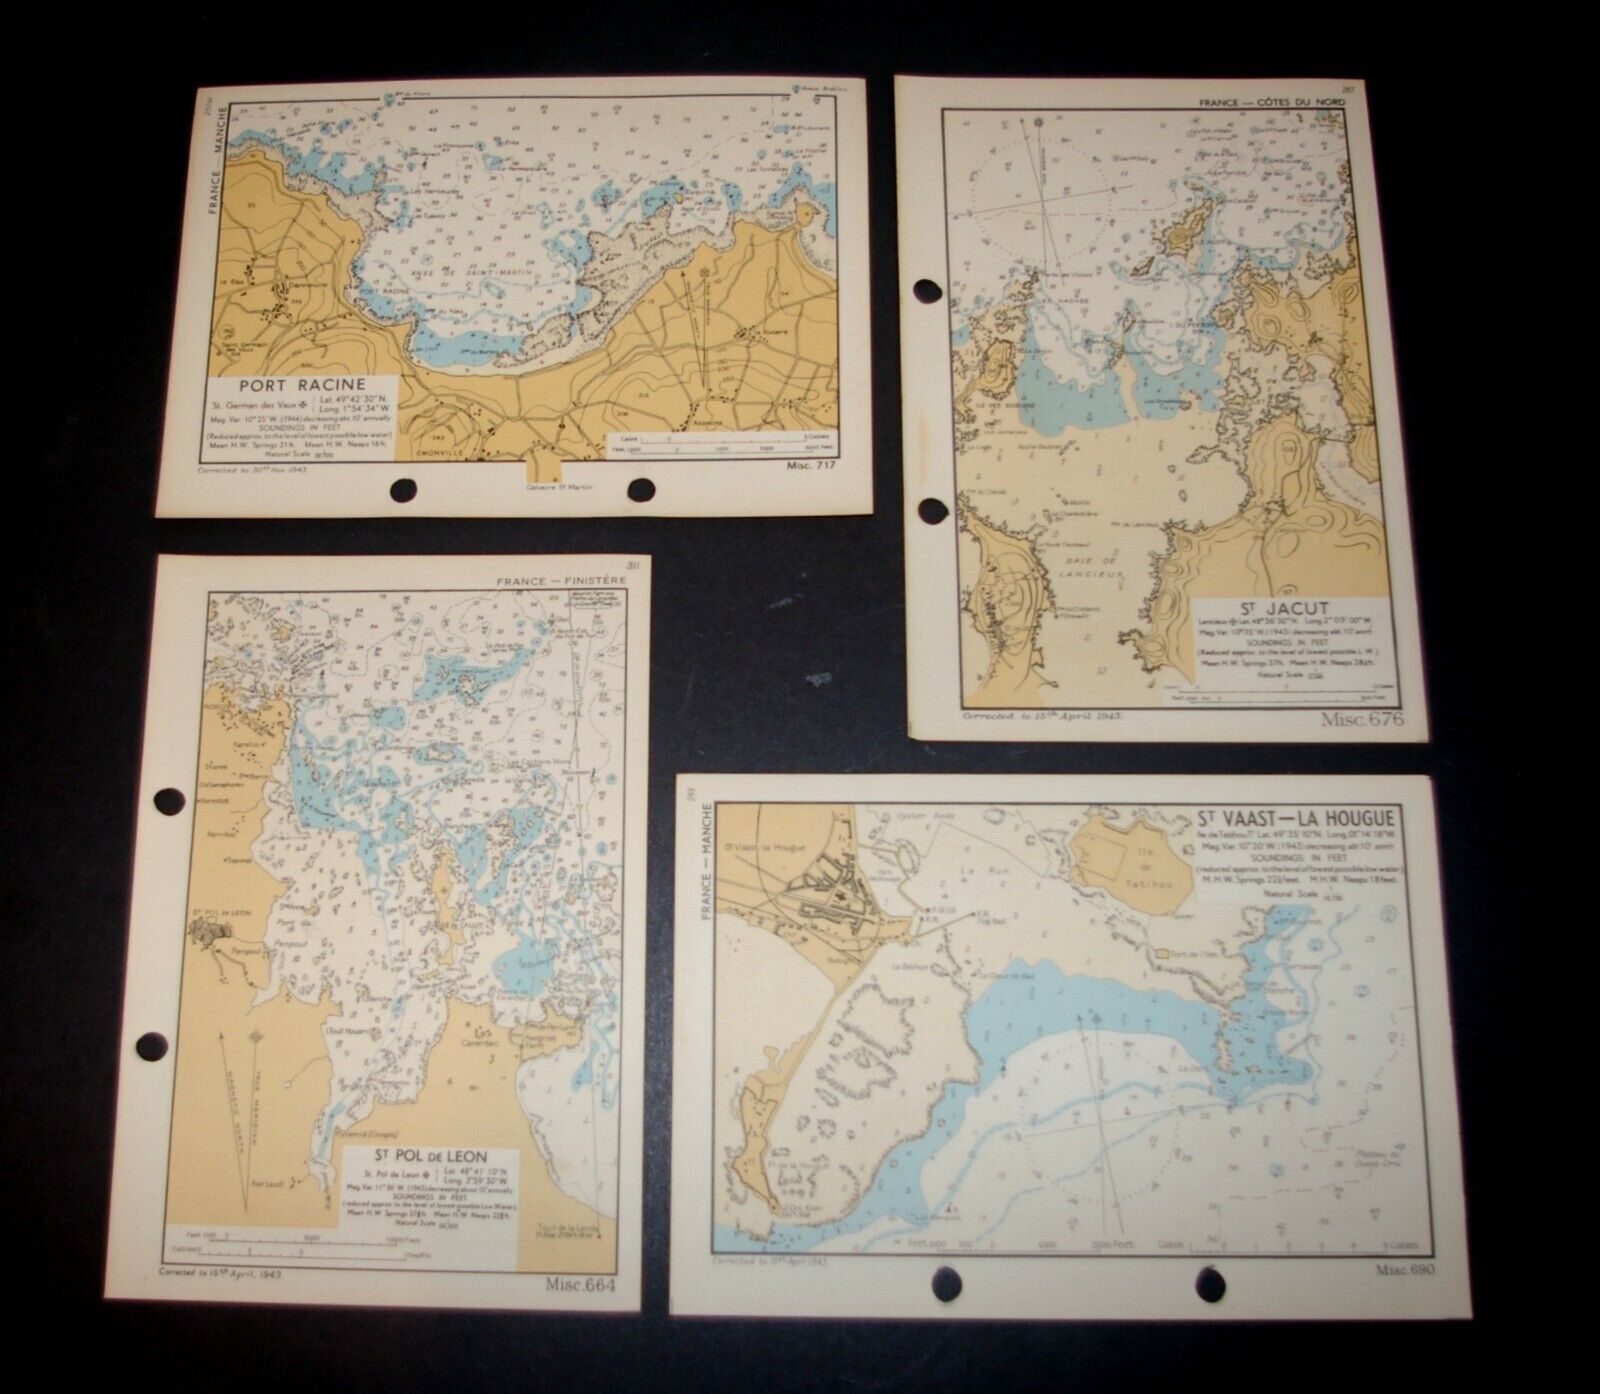 WW2 OVERLORD 4 Planning maps for D-day invasion of FRANCE - 1943 PORT RACINE